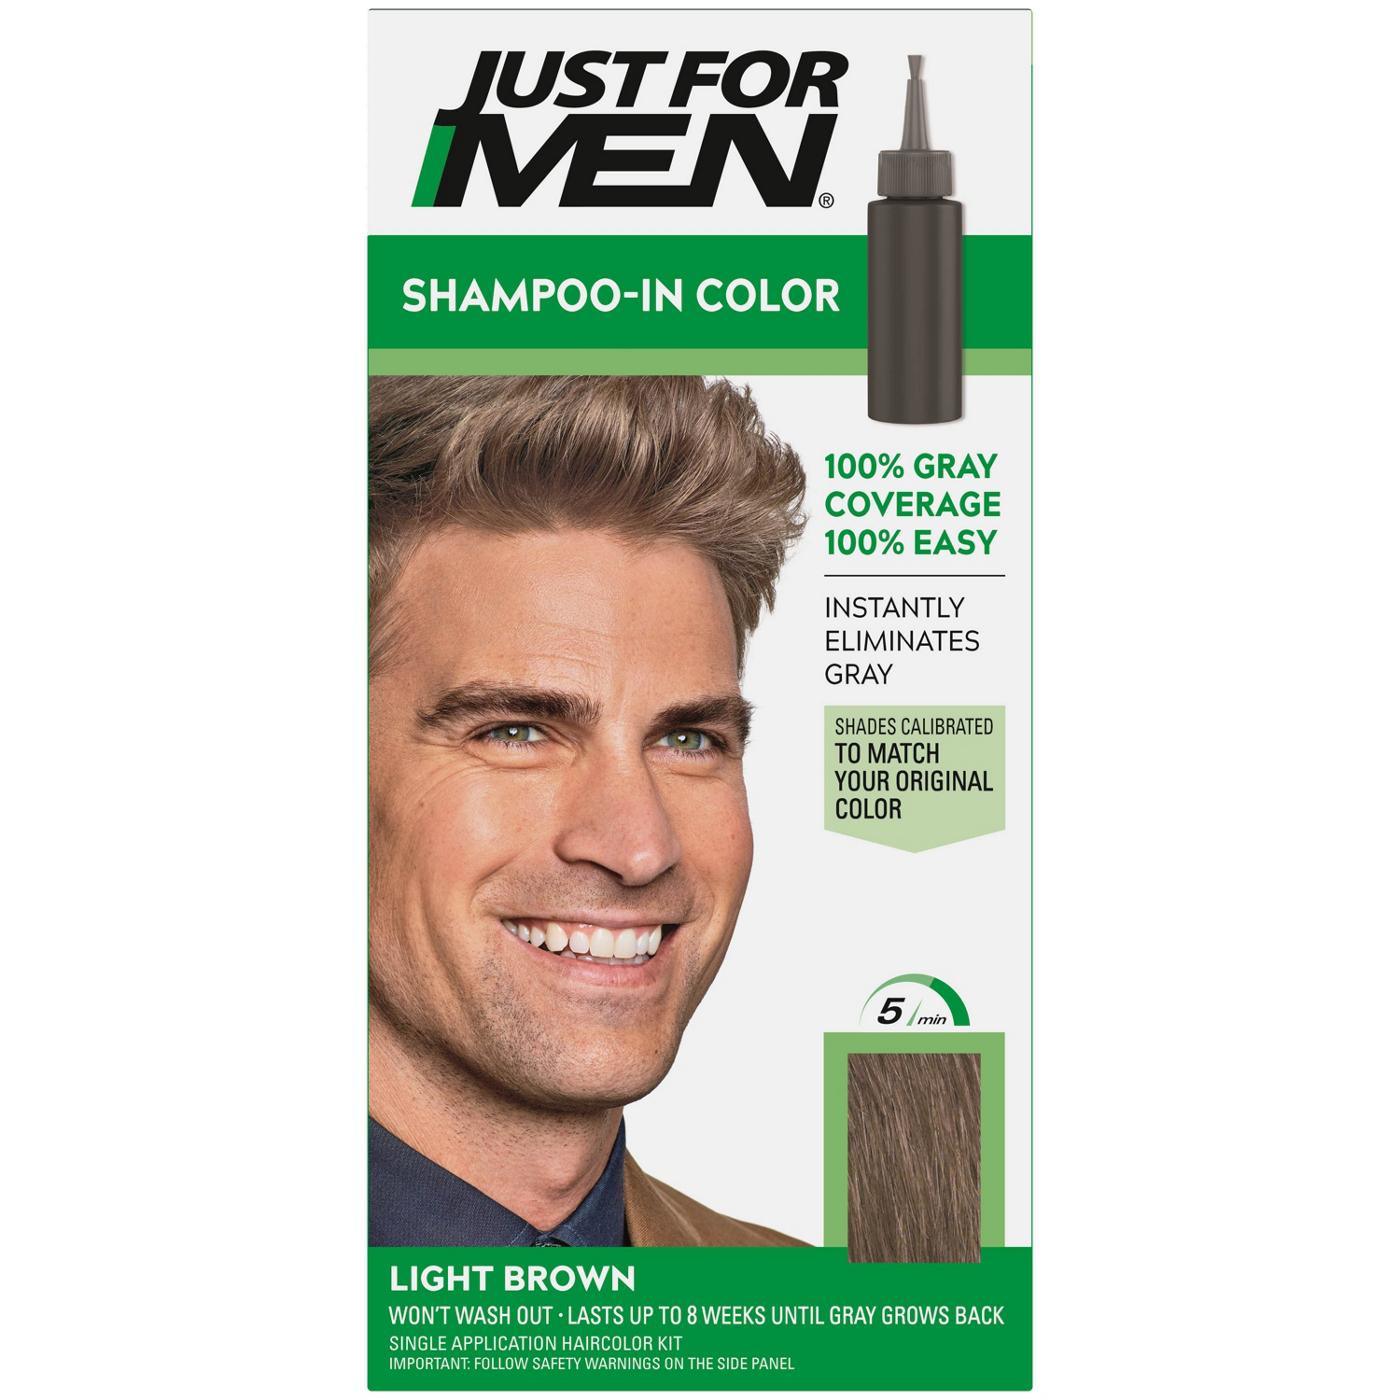 Just For Men Shampoo-In Haircolor Light Brown H-25; image 2 of 2